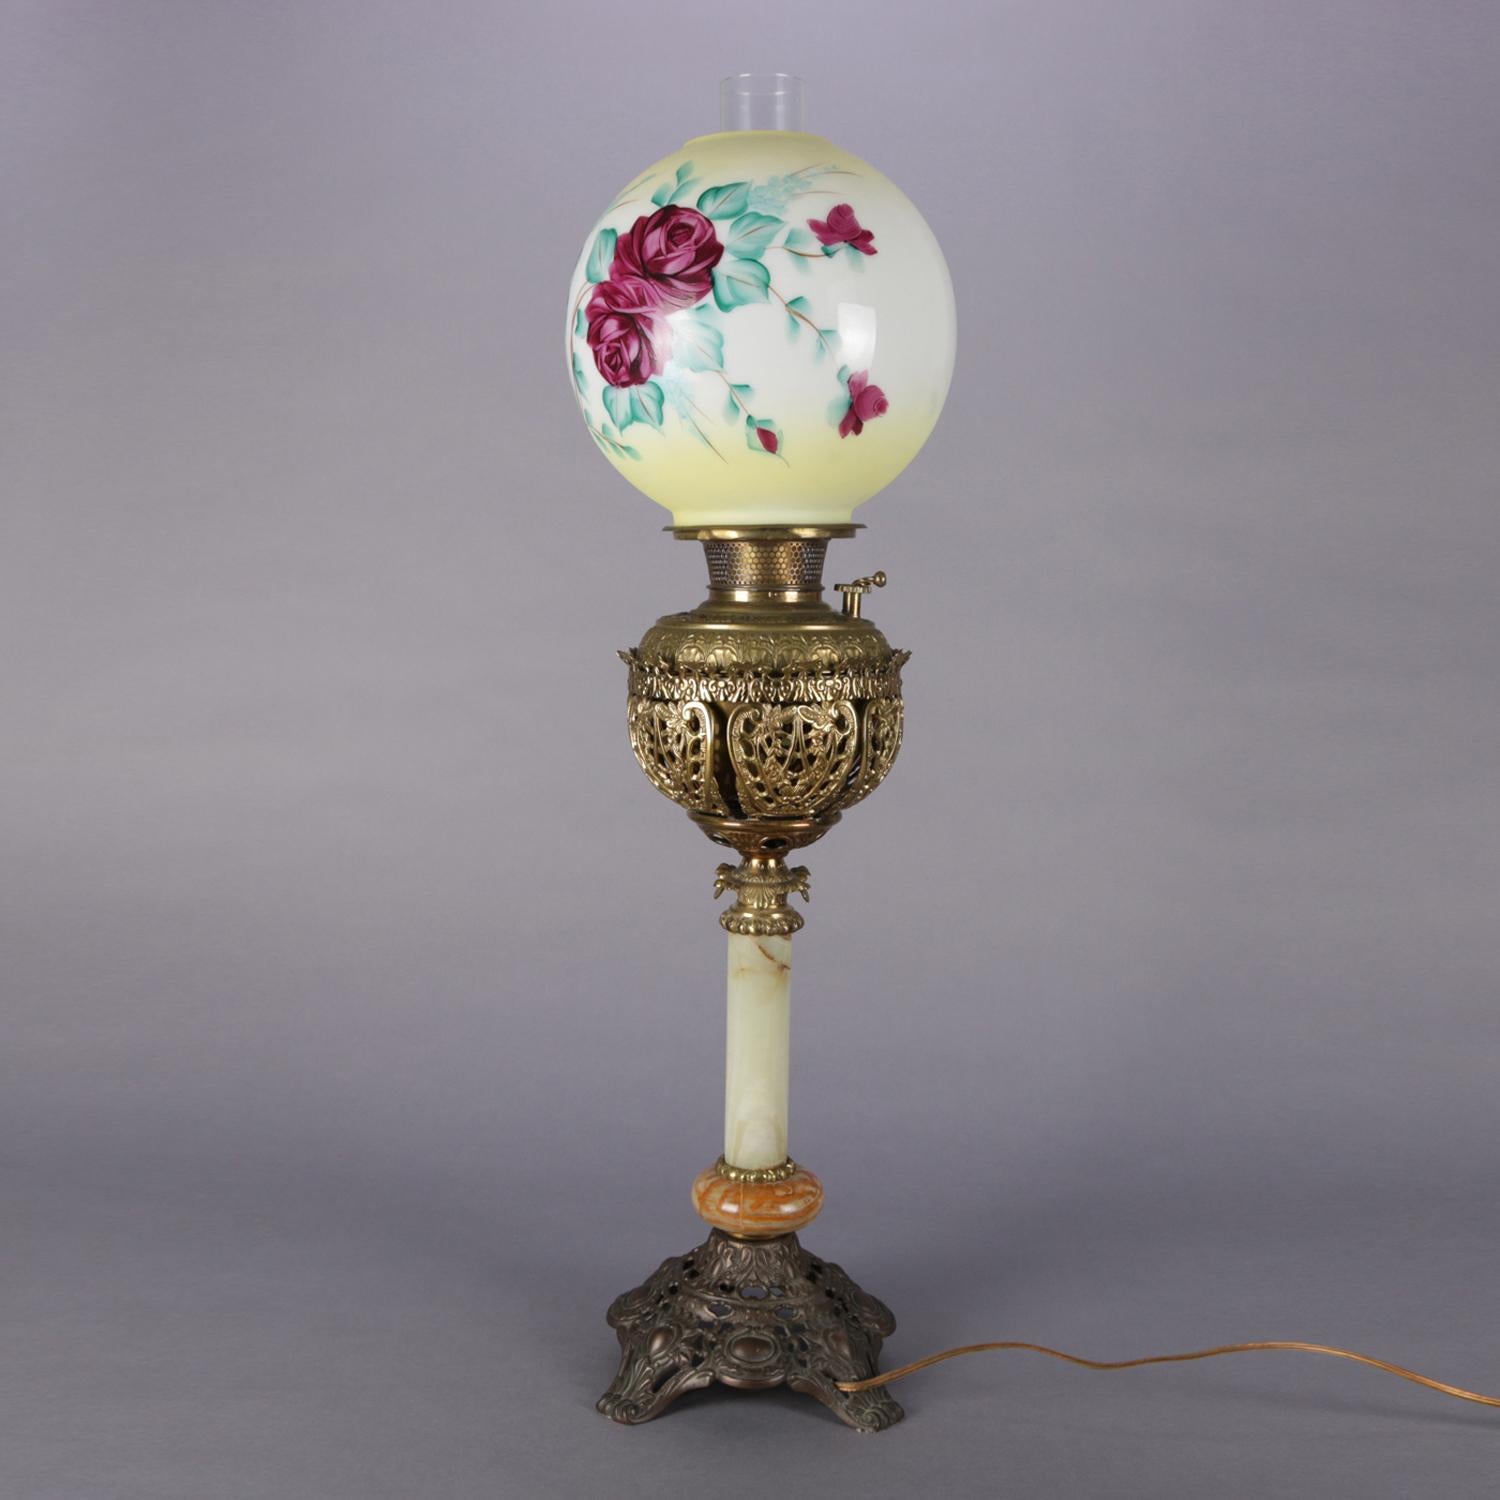 Antique electrified Gone-With-The-Wind table lamp features hand-painted globe with roses above pierce scroll and foliate brass font and raised on an onyx column seated on pierced and footed base, circa 1890.

Measures: 31